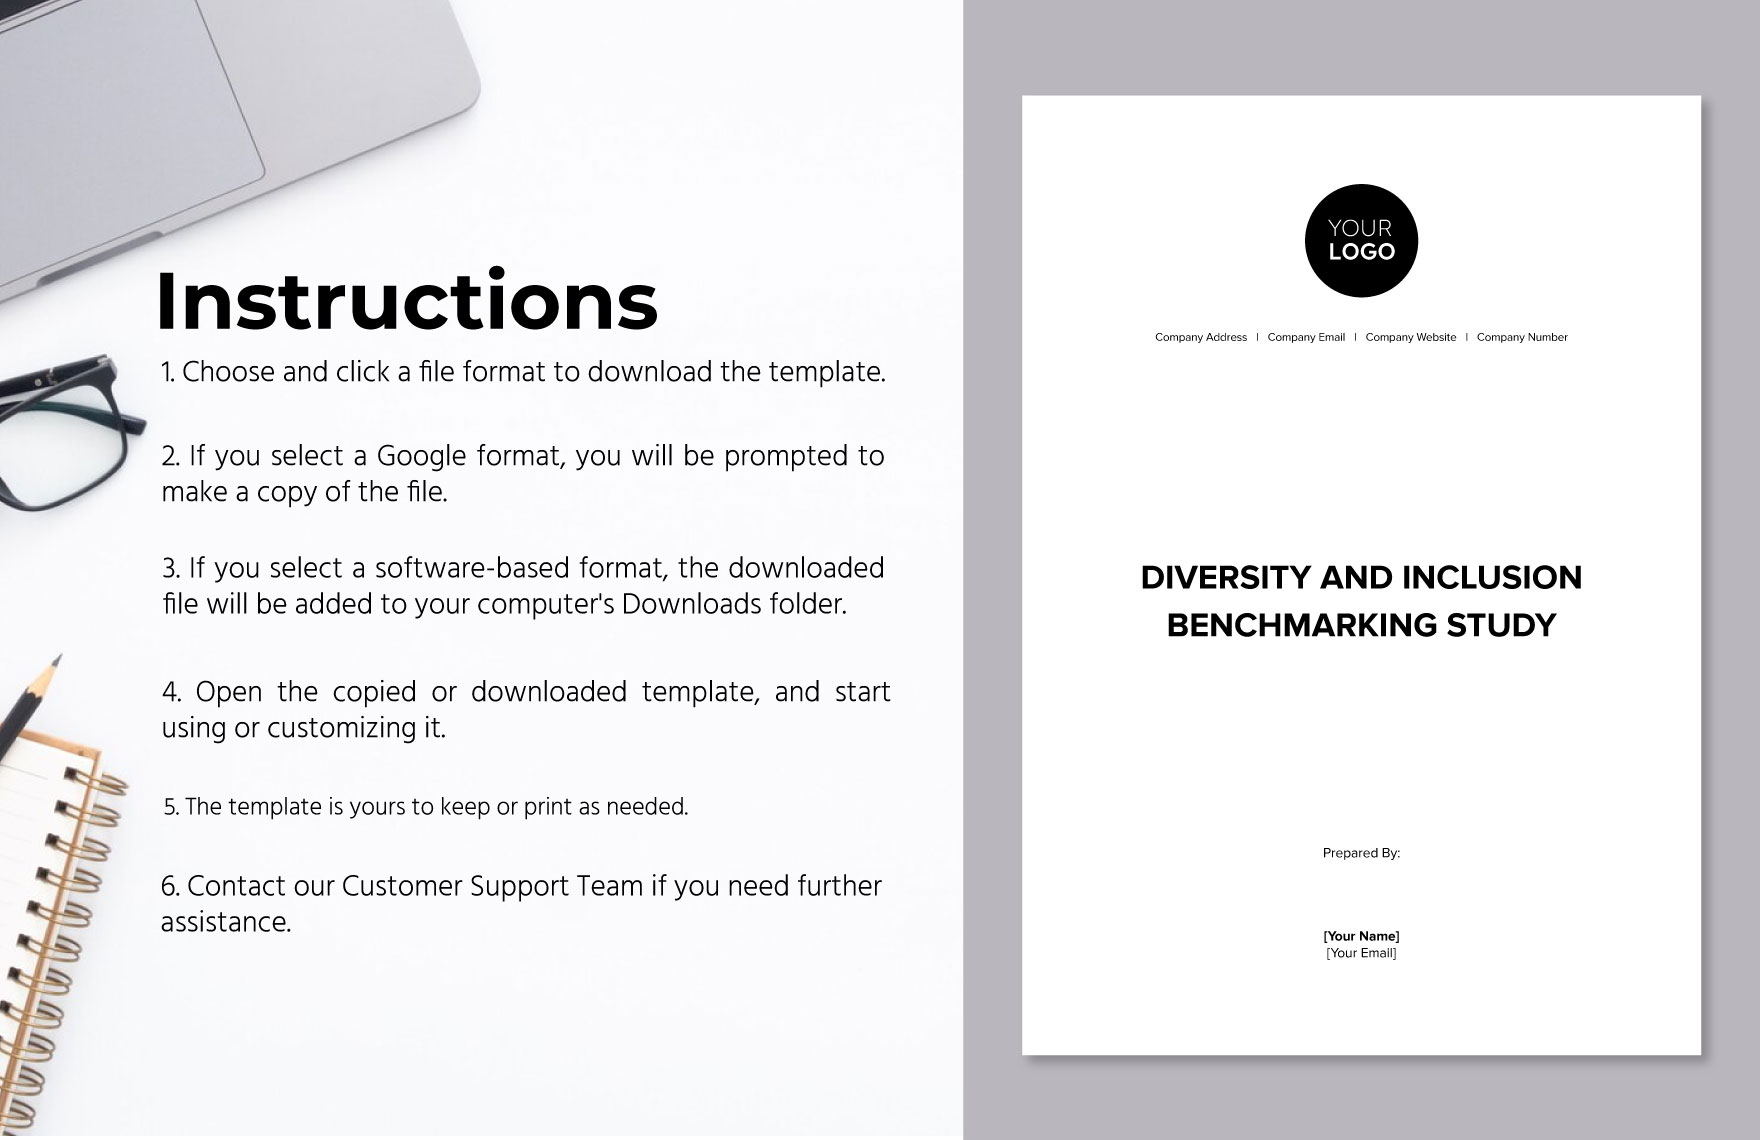 Diversity and Inclusion Benchmarking Study HR Template